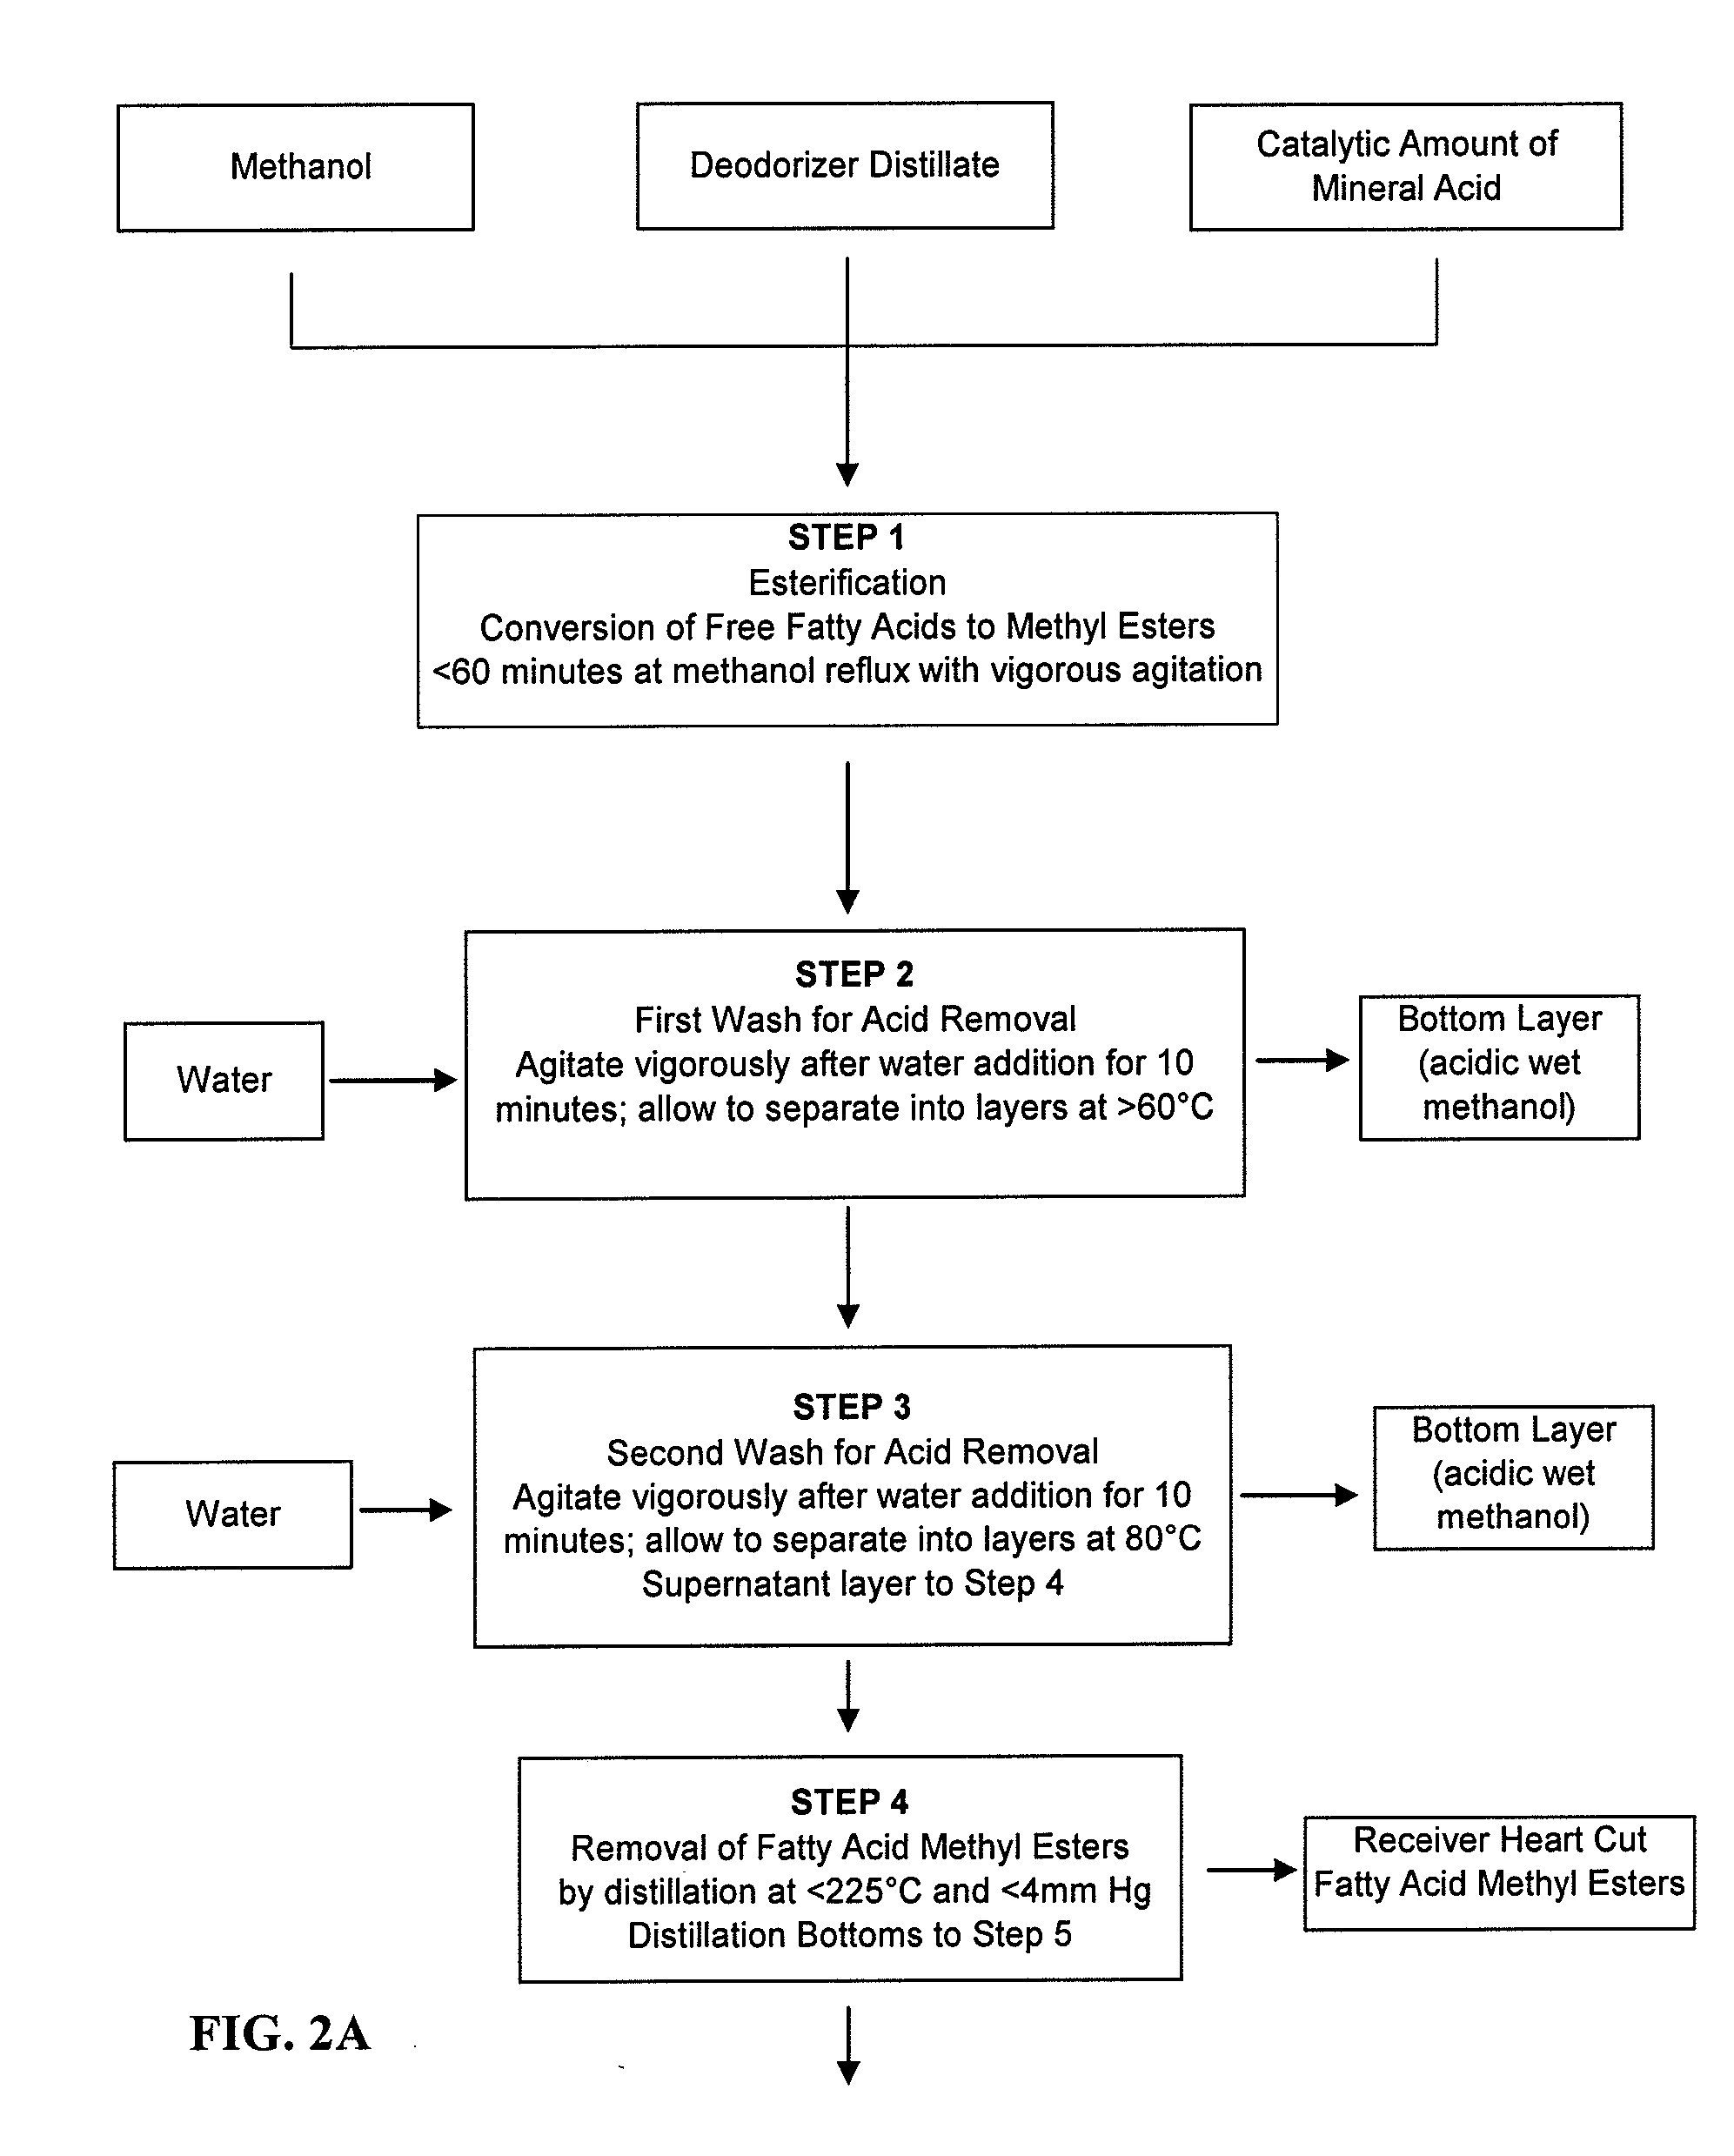 Process for isolating phytosterols and tocopherols from deodorizer distillate